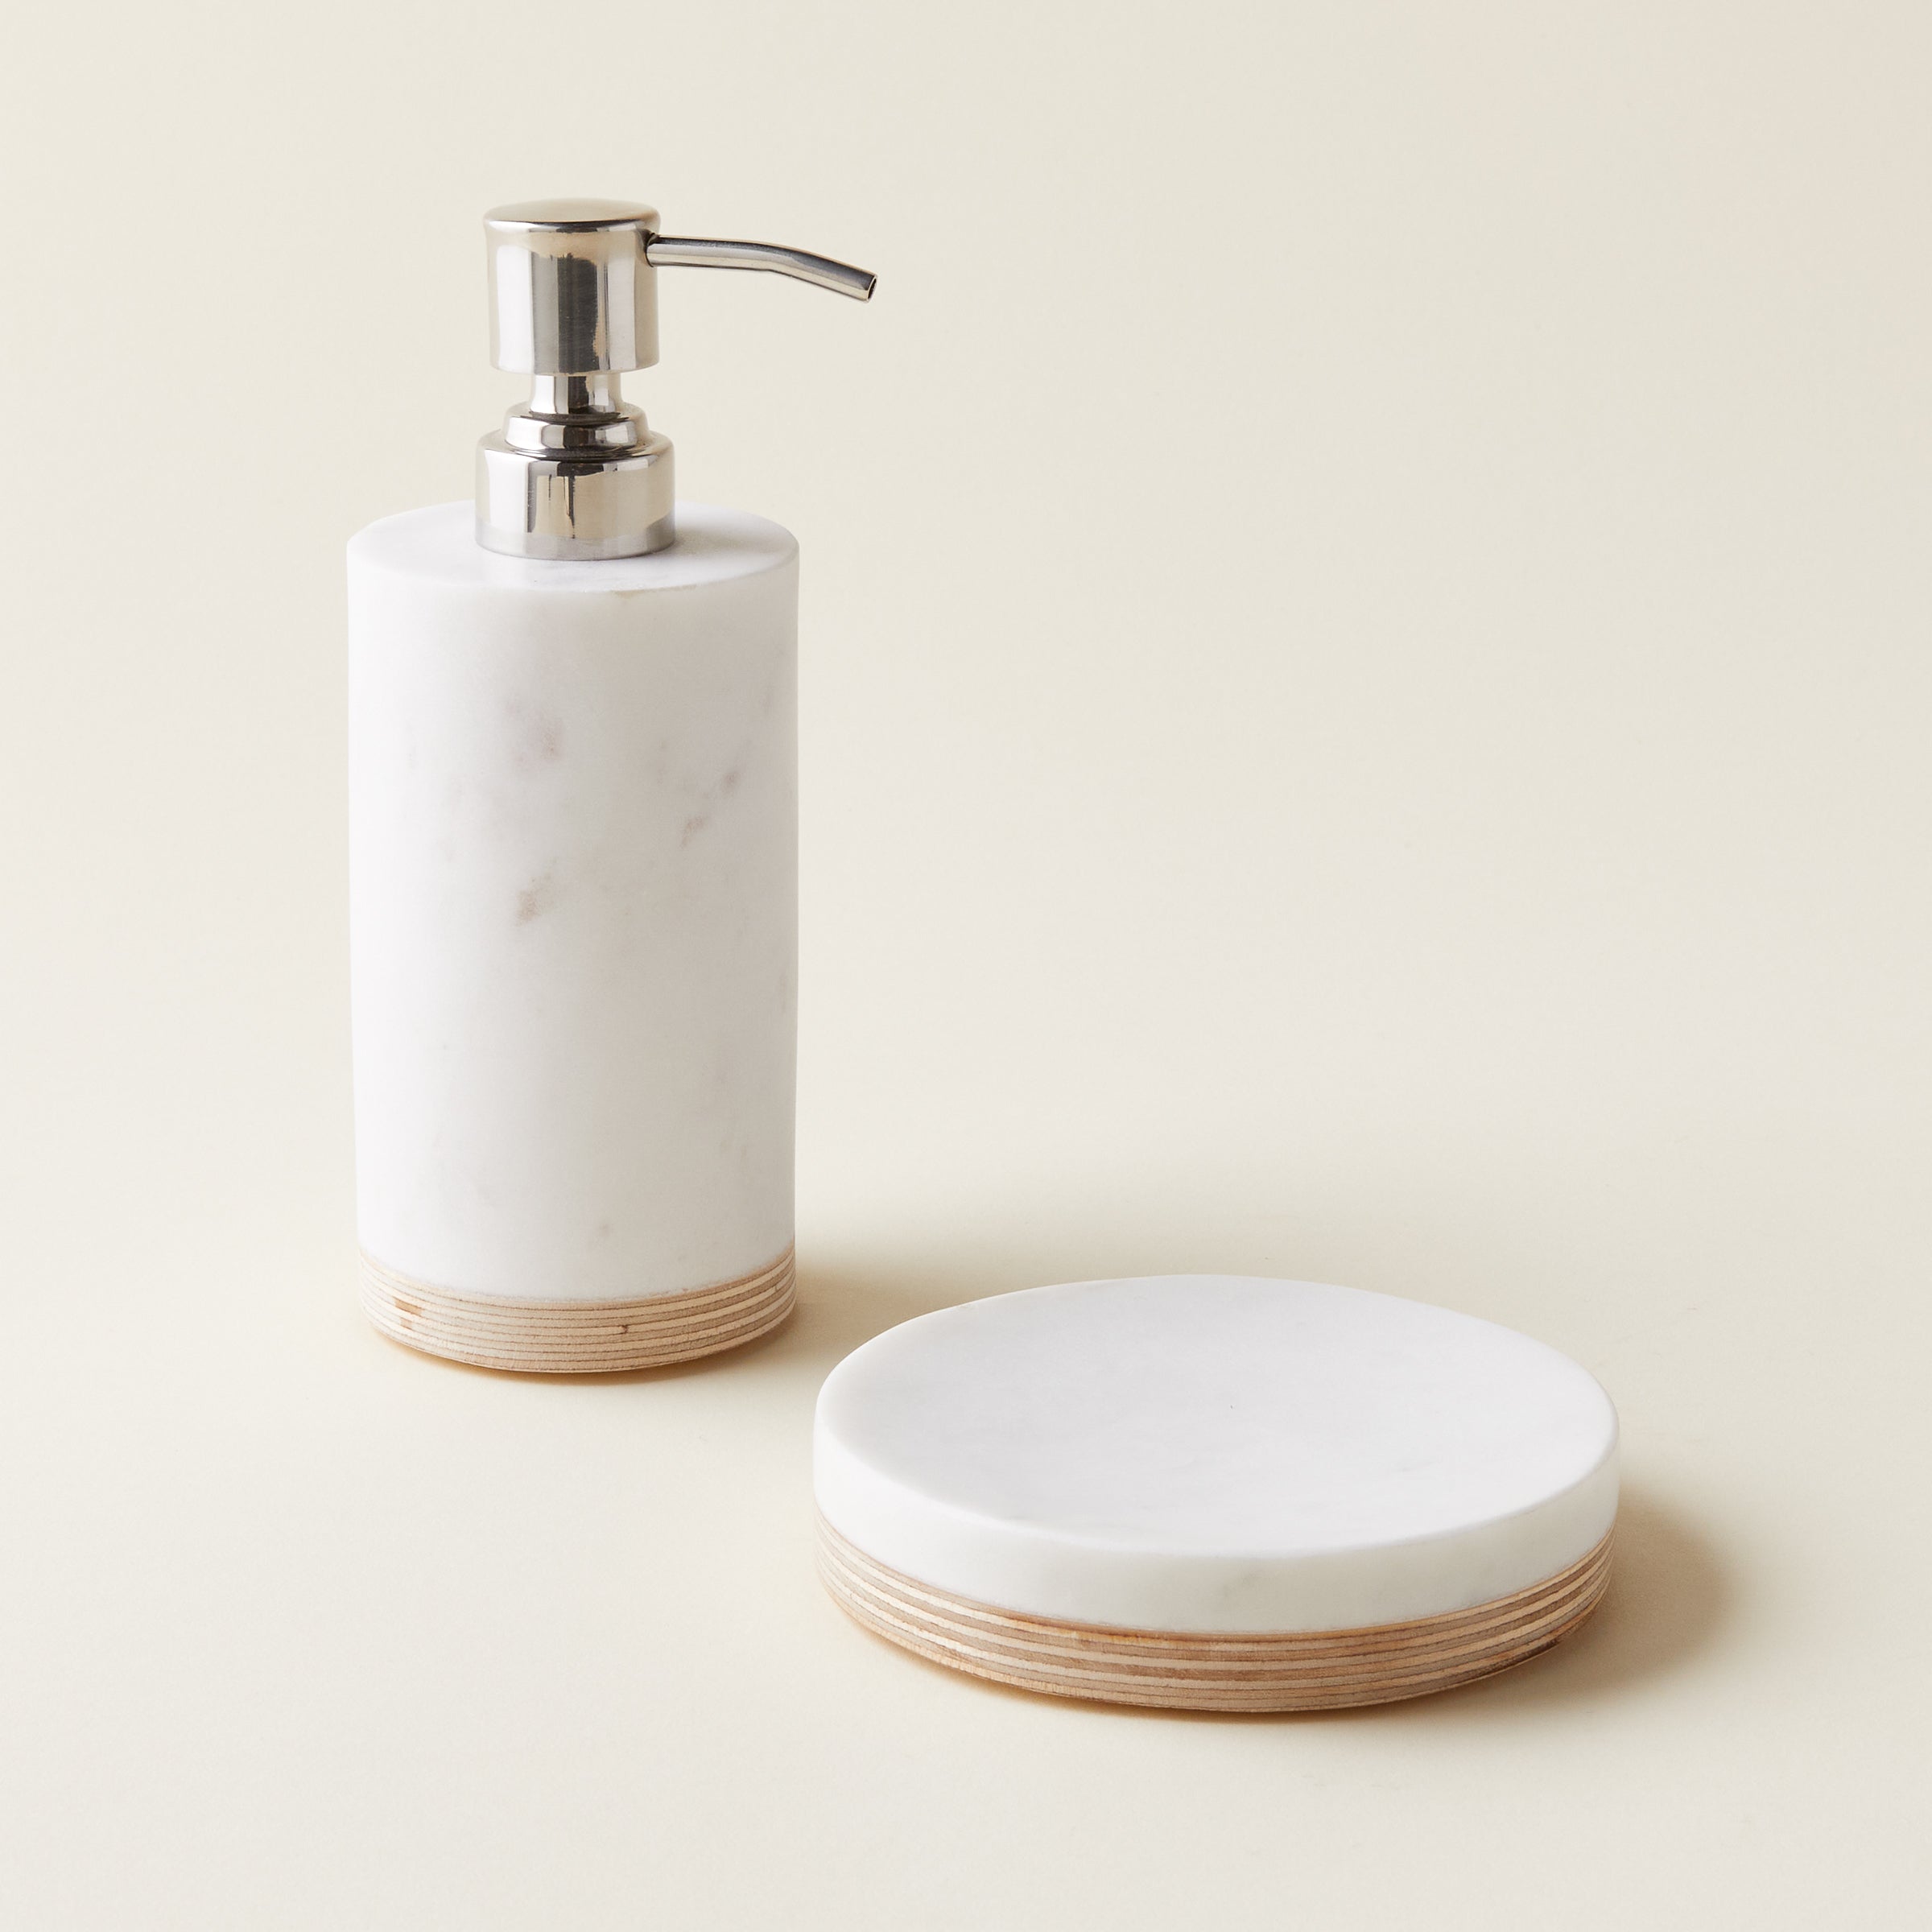 Marble and Wood Soap Dispenser